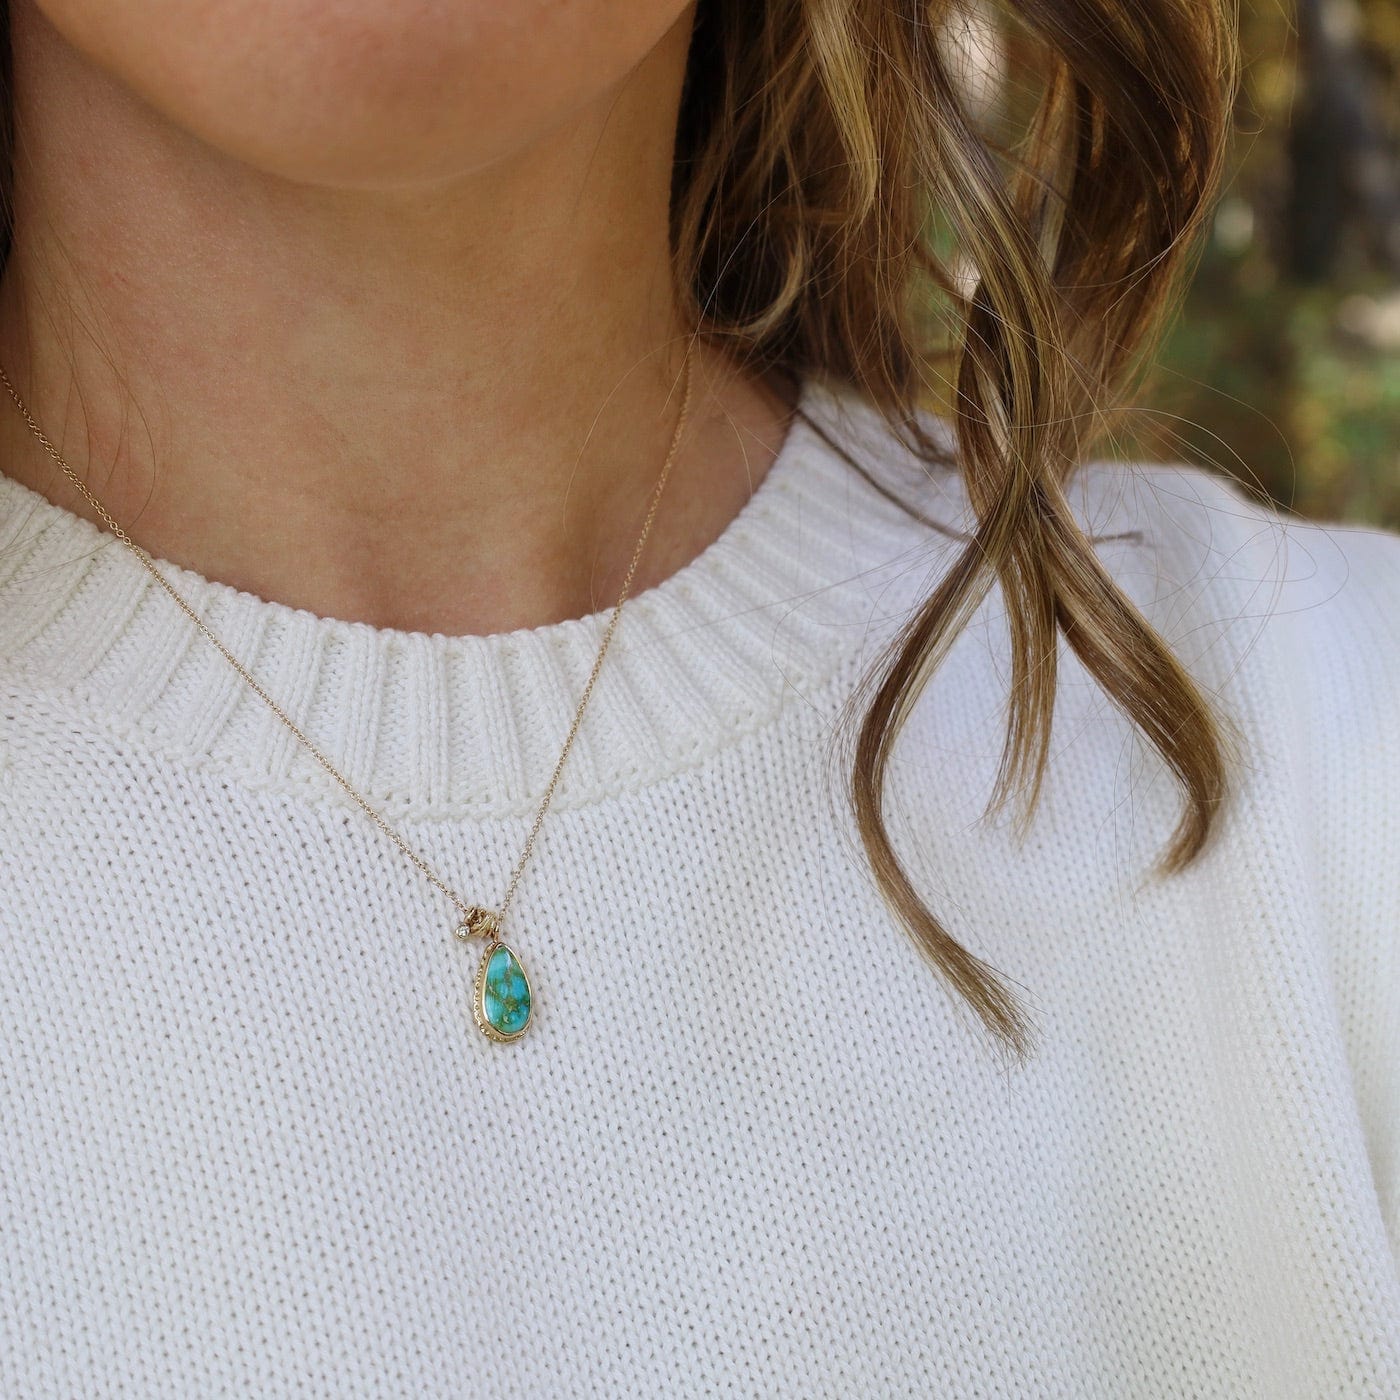 NKL-14K 14K Gold Necklace with Teardrop Sonoran Mountain Turquoise